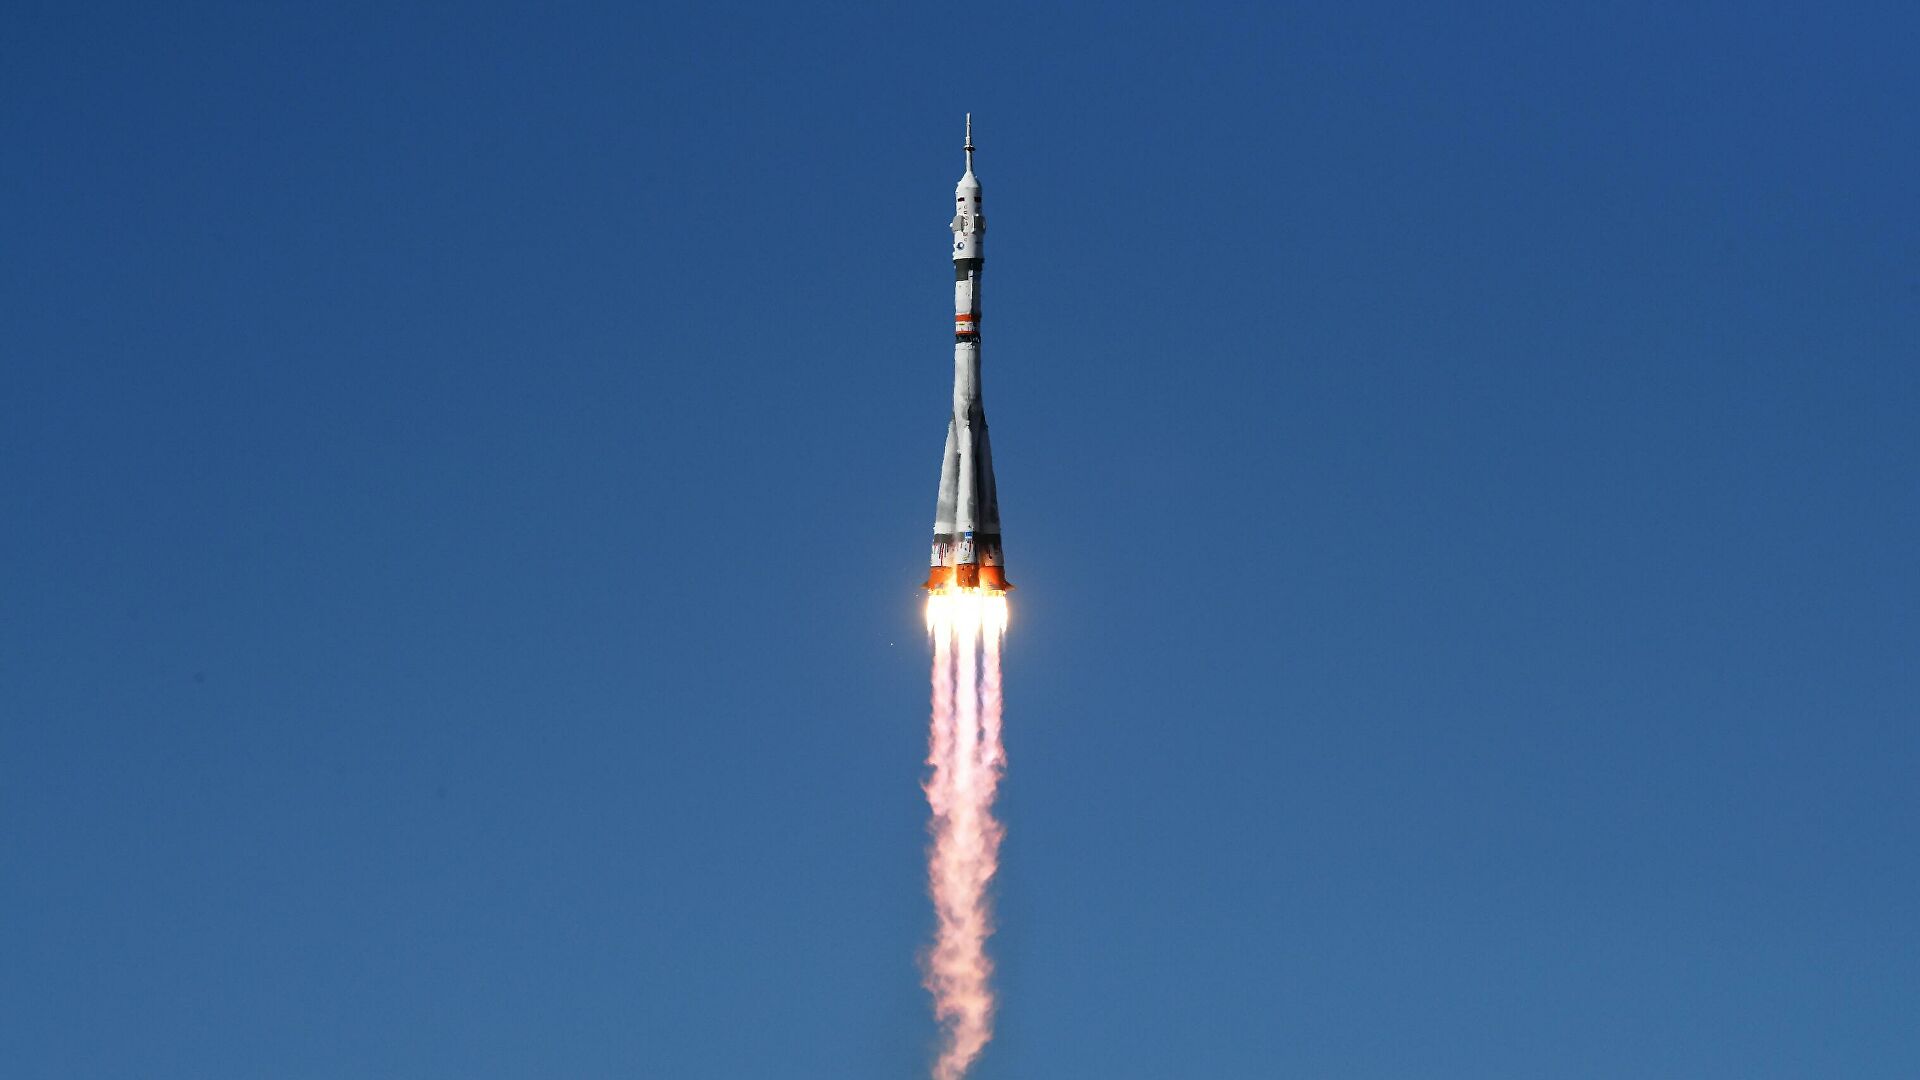 The Soyuz-2.1a launch vehicle with the Soyuz MS-19 successfully launched from the Baikonur cosmodrome